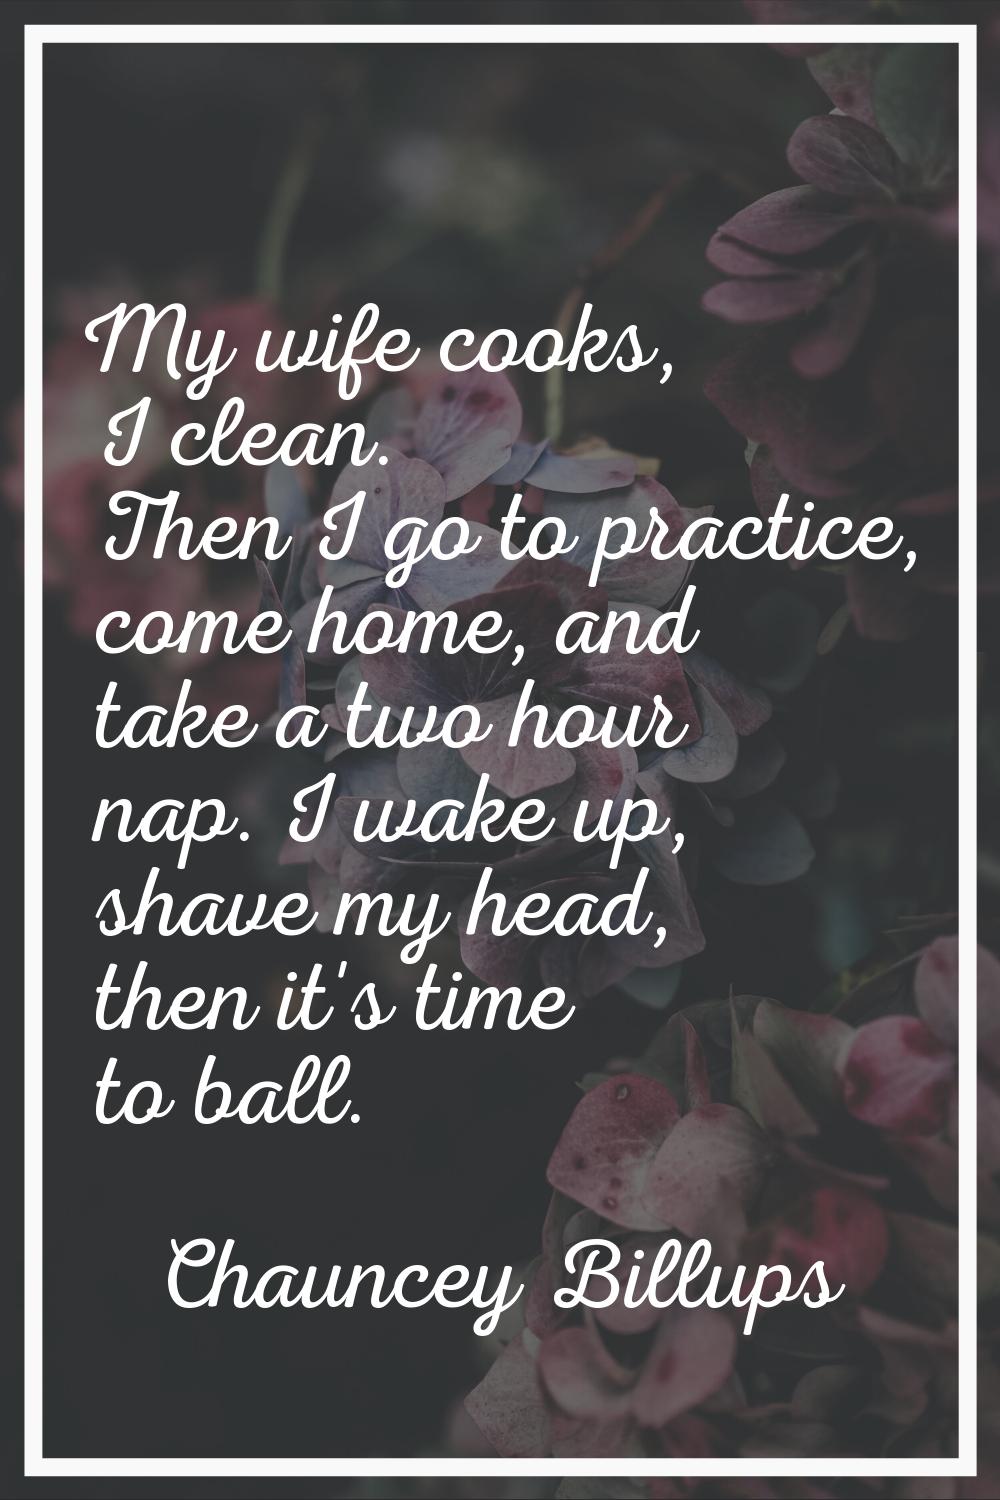 My wife cooks, I clean. Then I go to practice, come home, and take a two hour nap. I wake up, shave